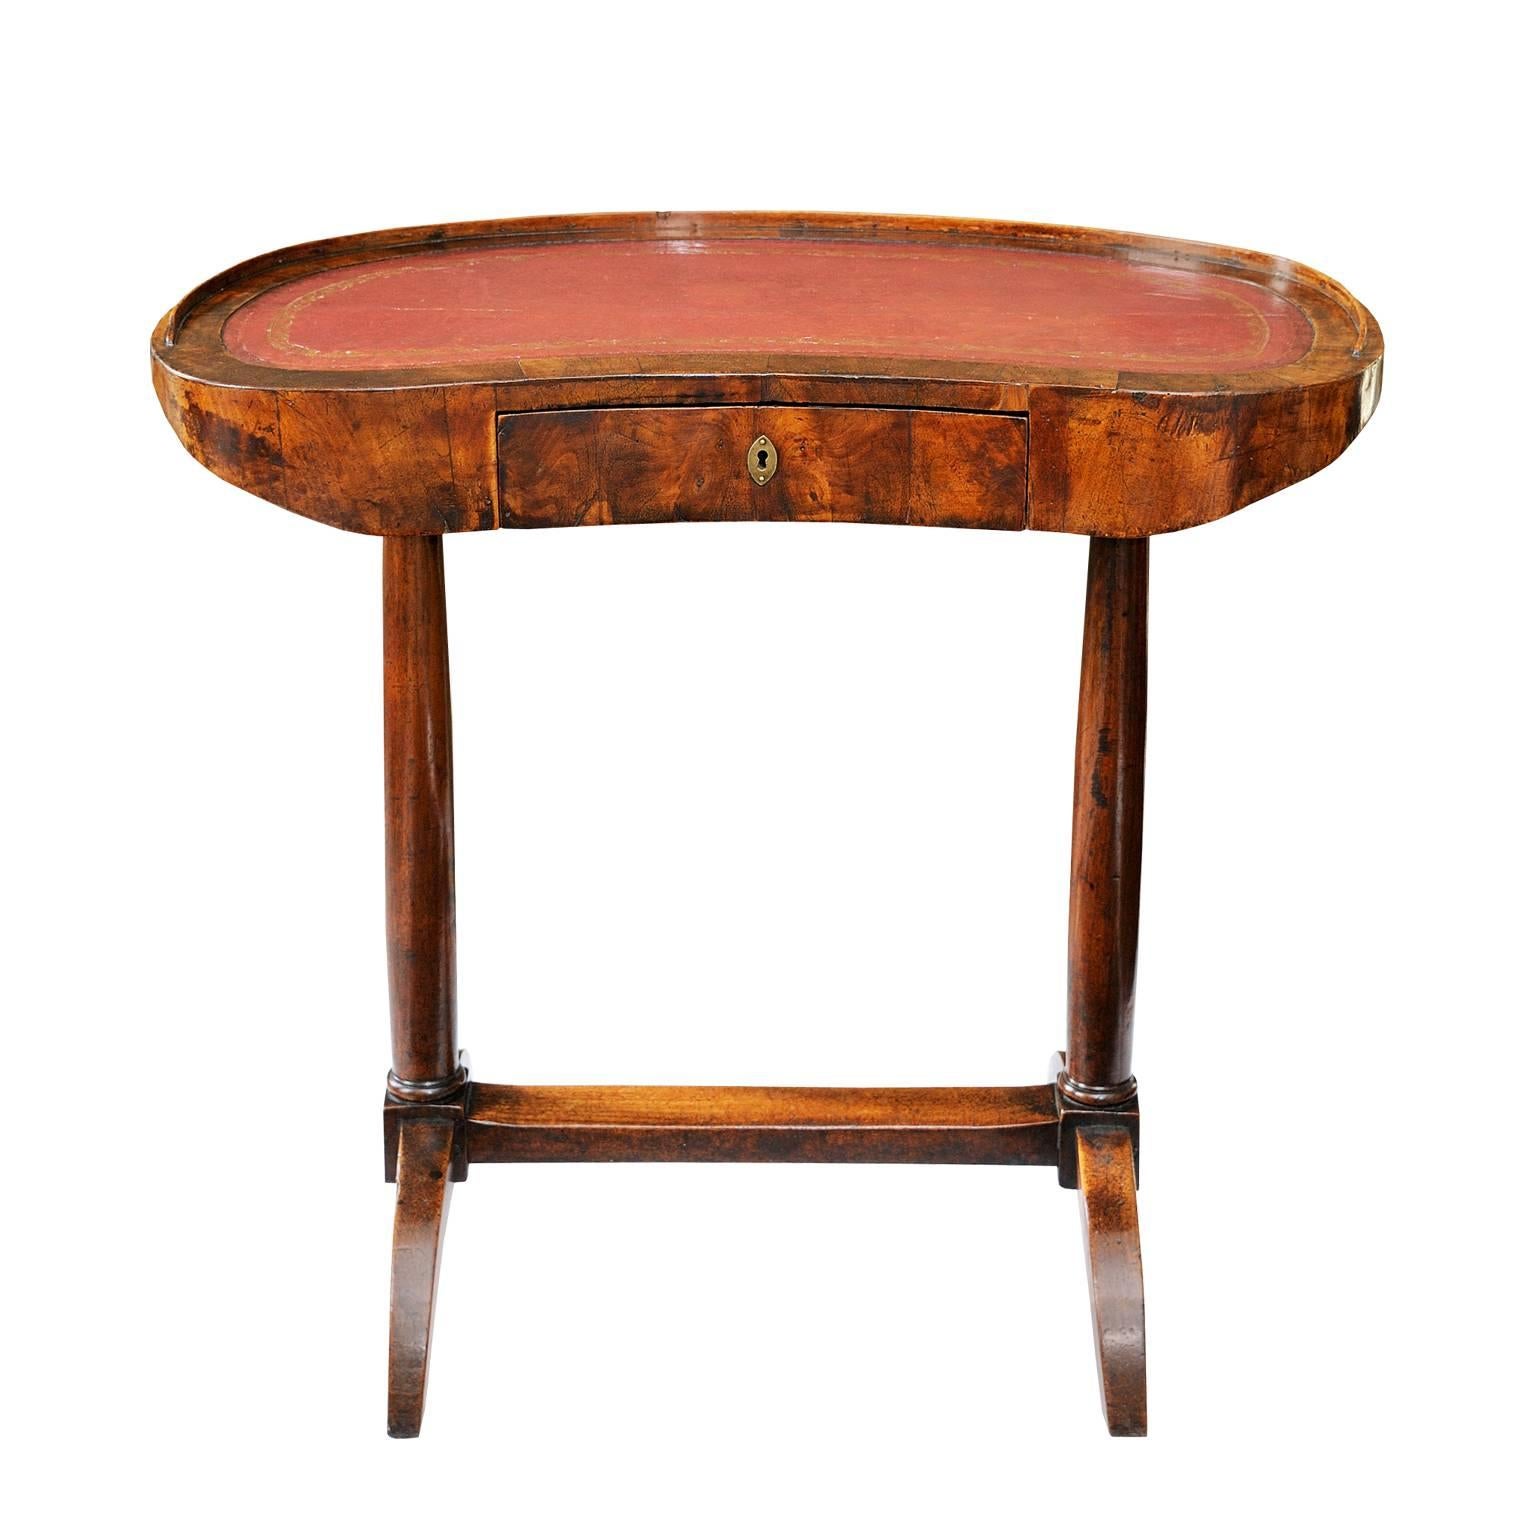 A French Napoleonic Empire period walnut kidney-shaped writing desk or dressing table with a small drawer to the front and a tooled leather top. (c.1820)